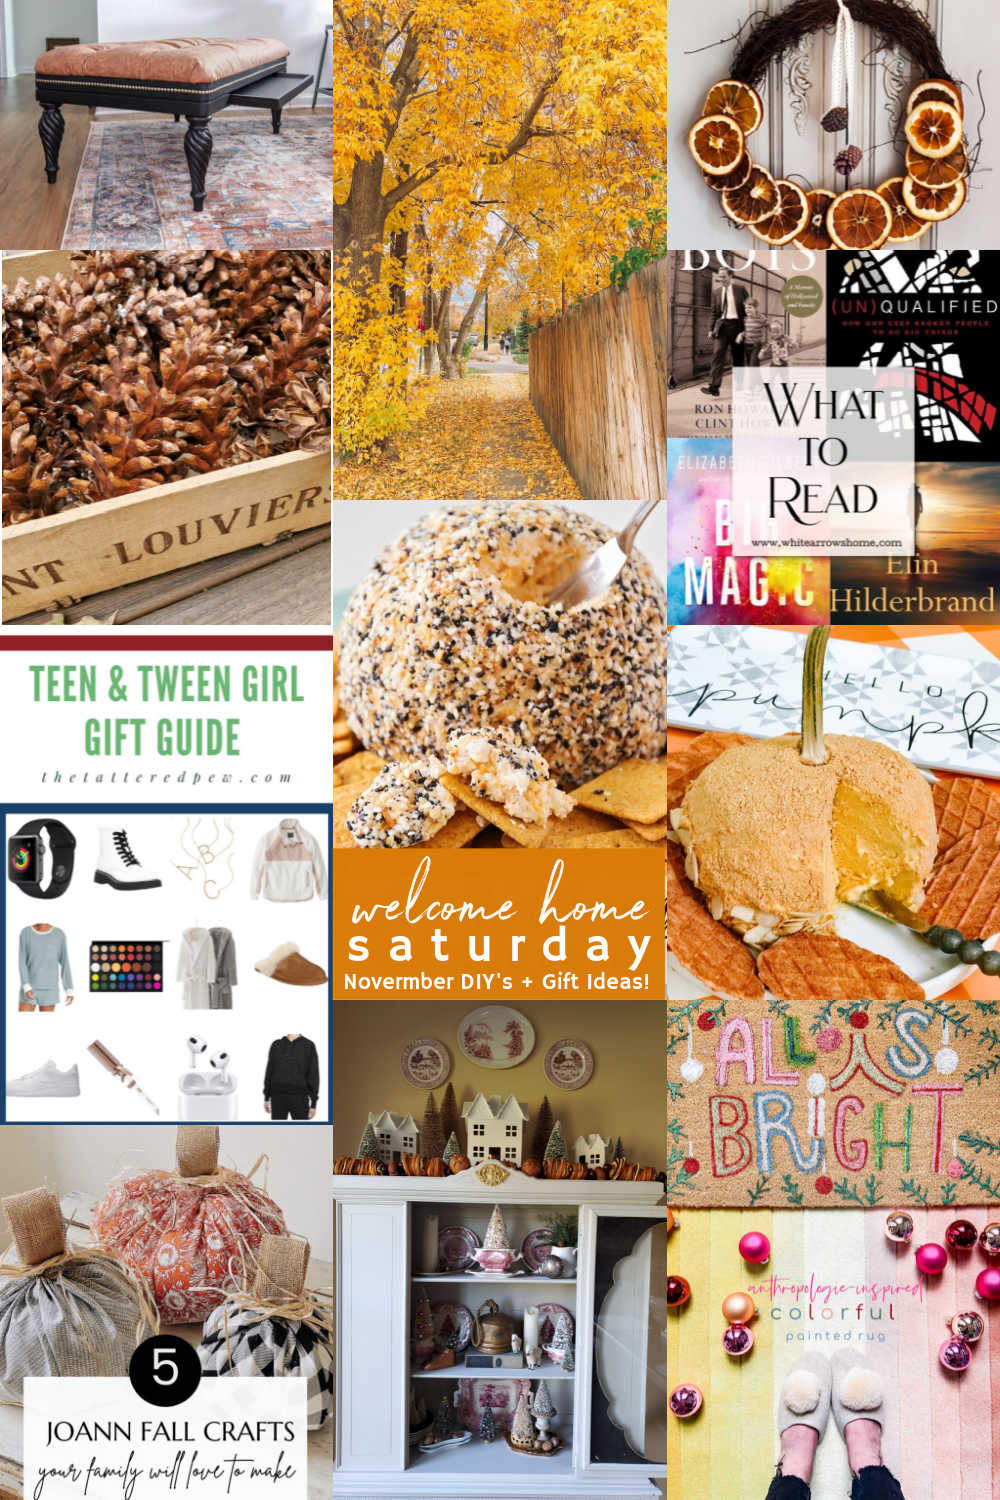 Welcome Home Saturday - November Home DIY and Gift Ideas!